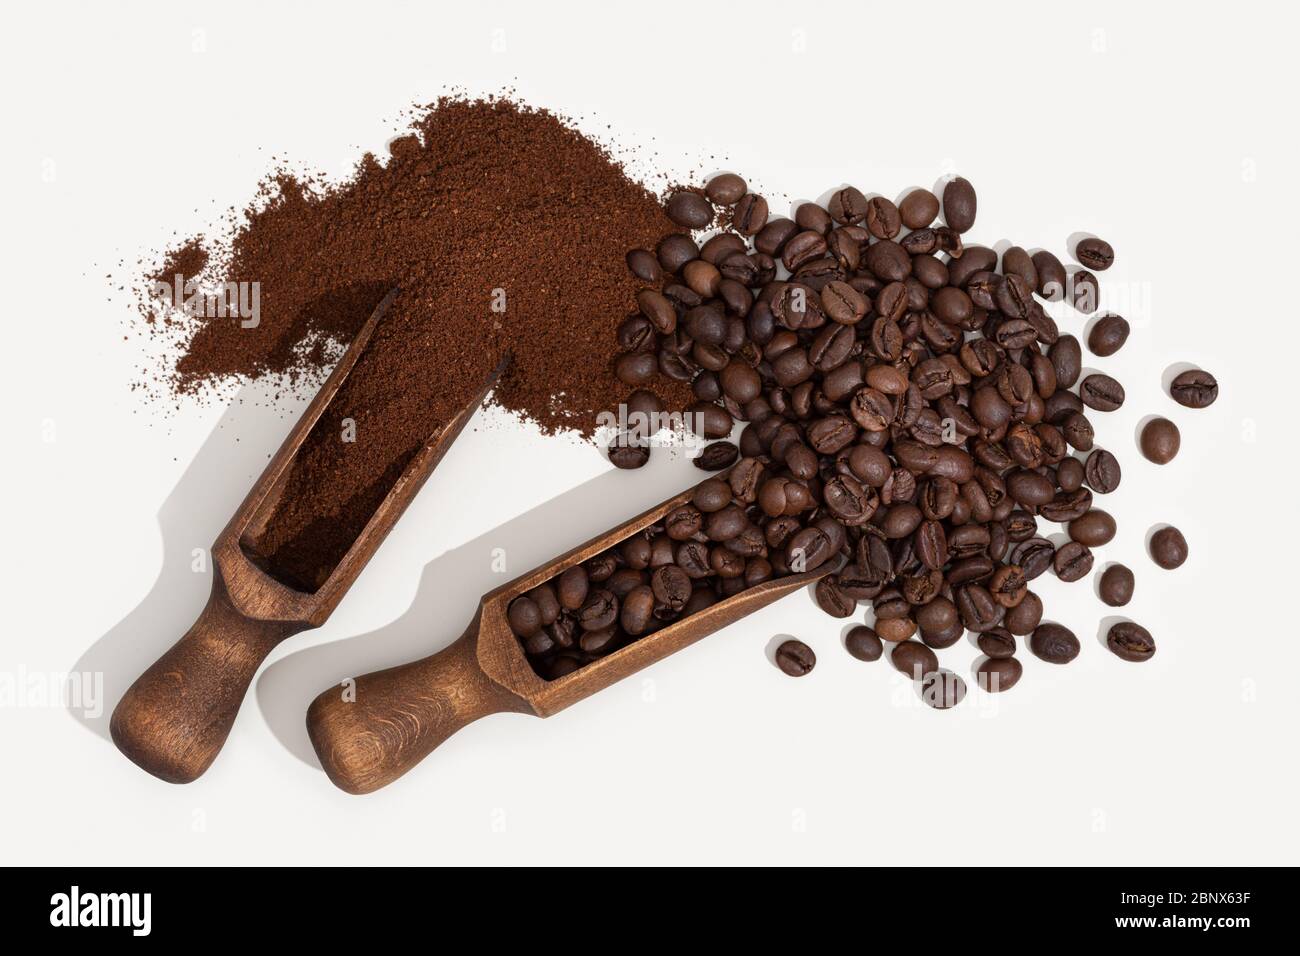 Roasted coffee beans and coffee ground isolated on white background. Top view Stock Photo